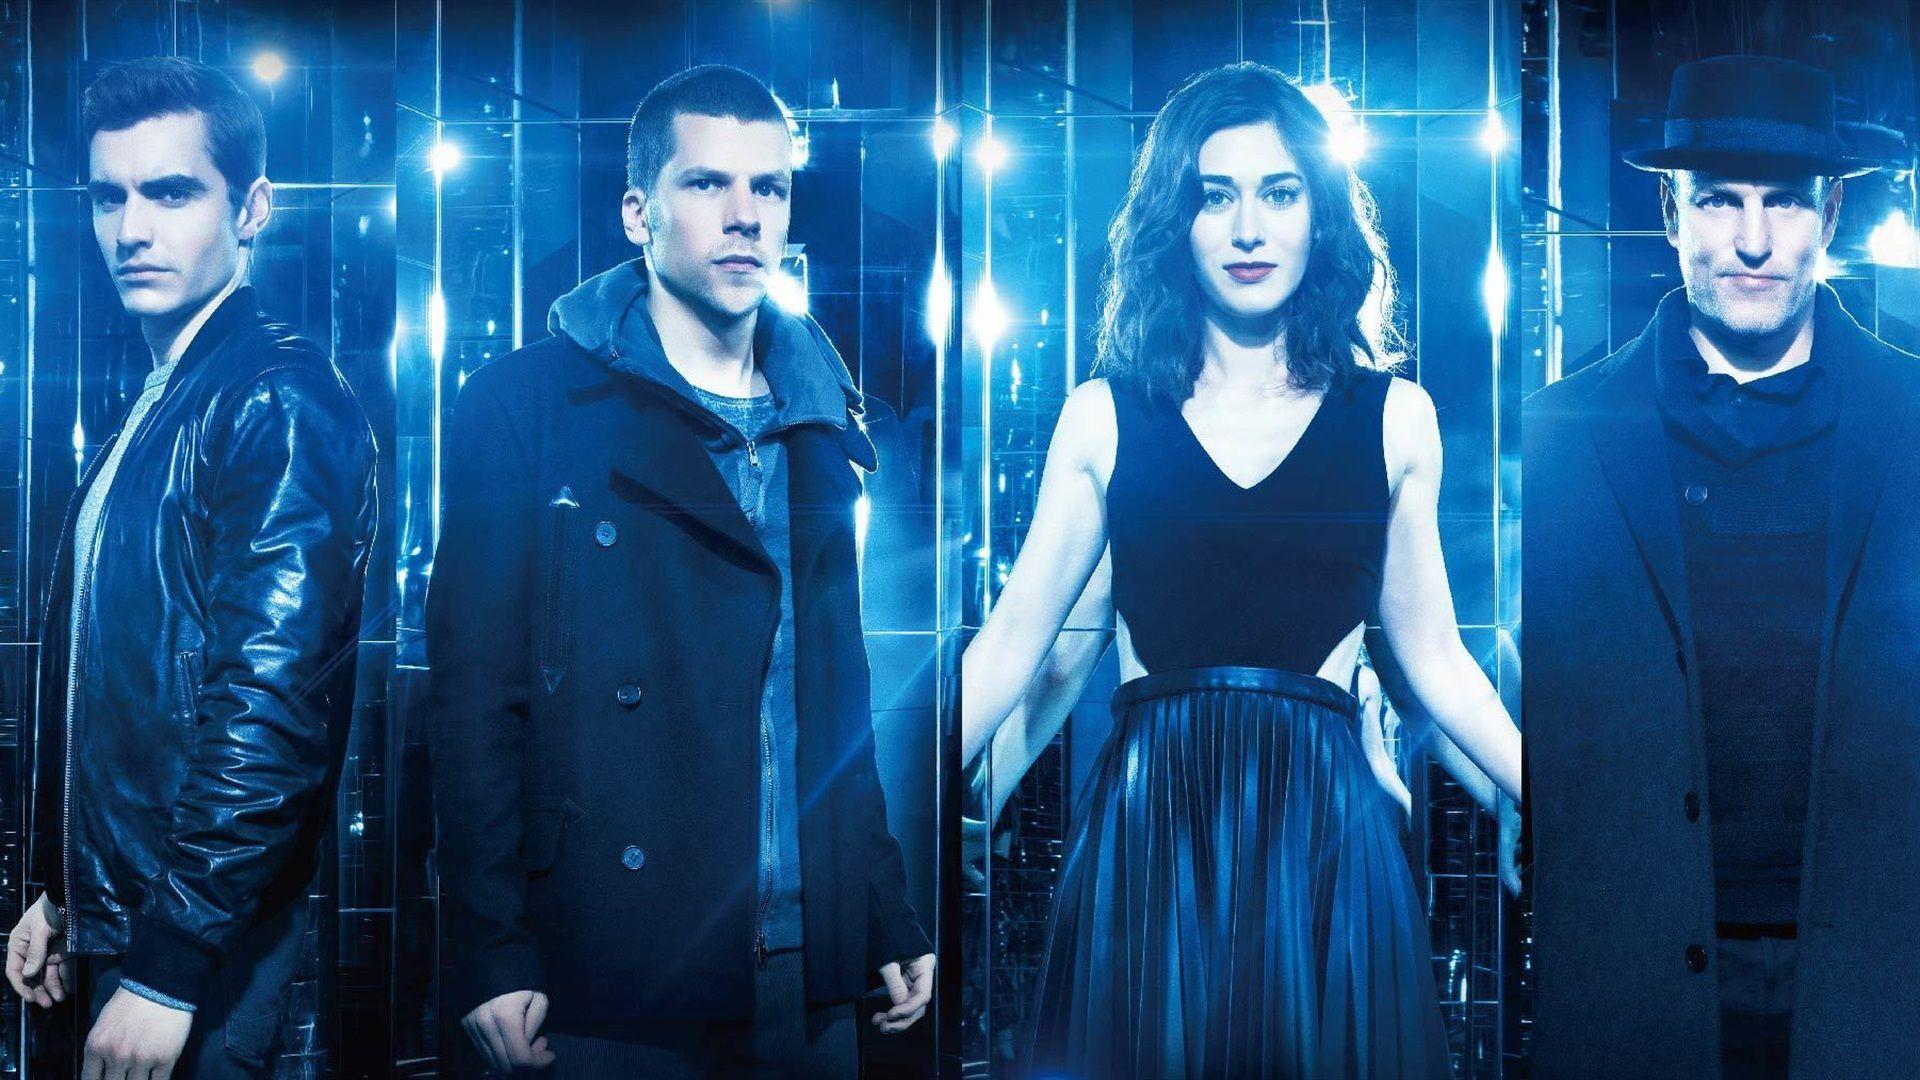 Now You See Me 2 HD wallpaper. movies and tv series. Wallpaper